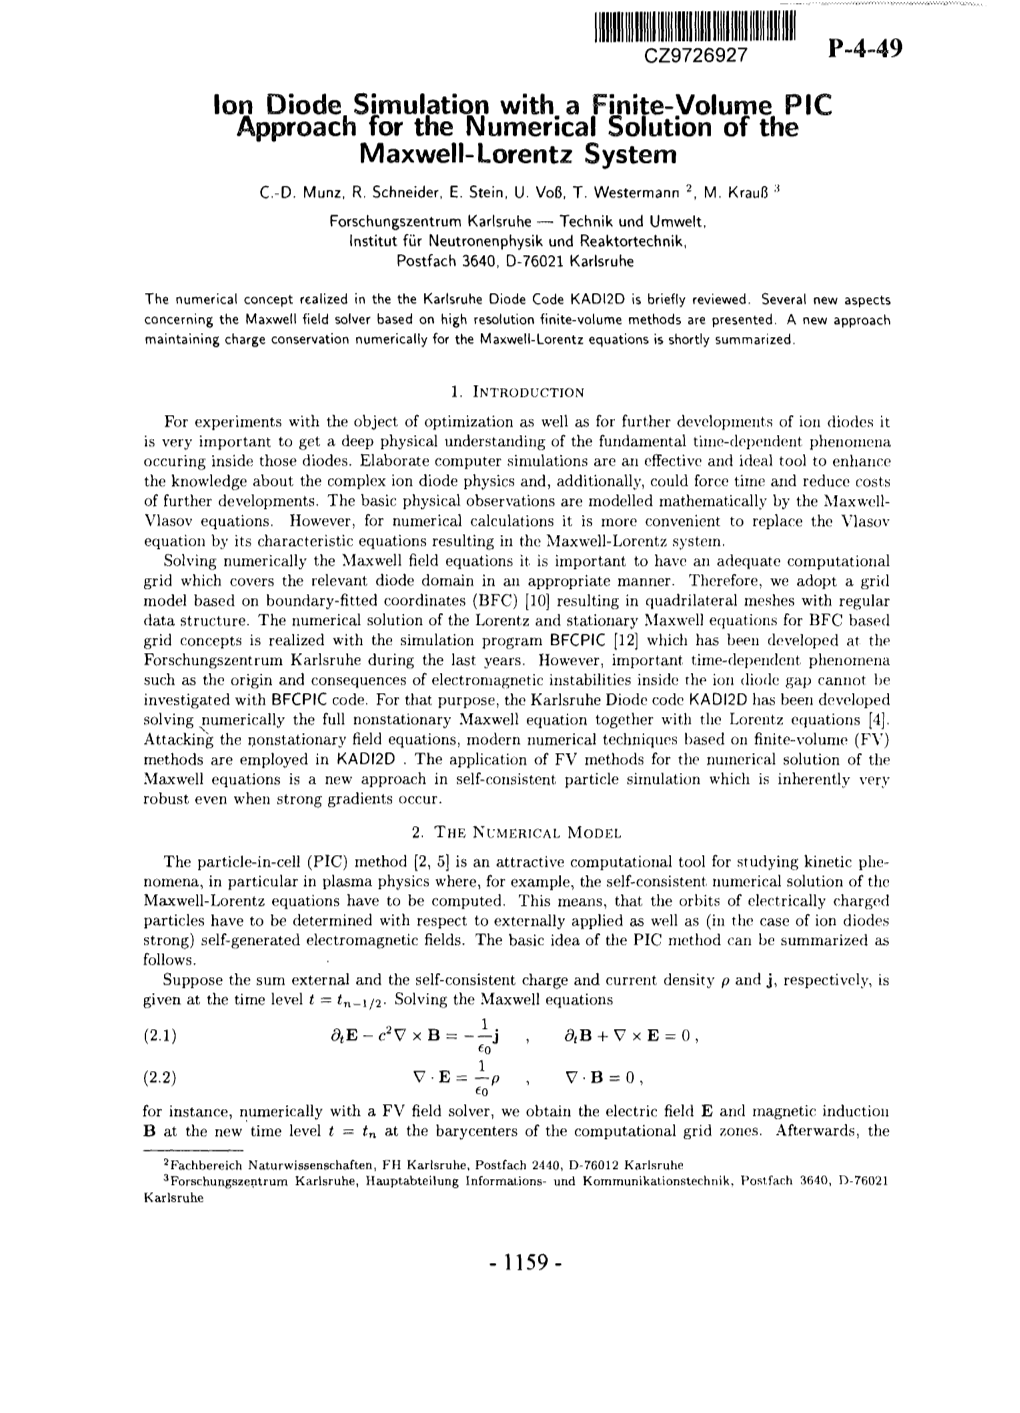 Ion Diode Simulation with a Finite-Volume PIC Approach for the Numerical Solution of the Maxwell-Lorentz System